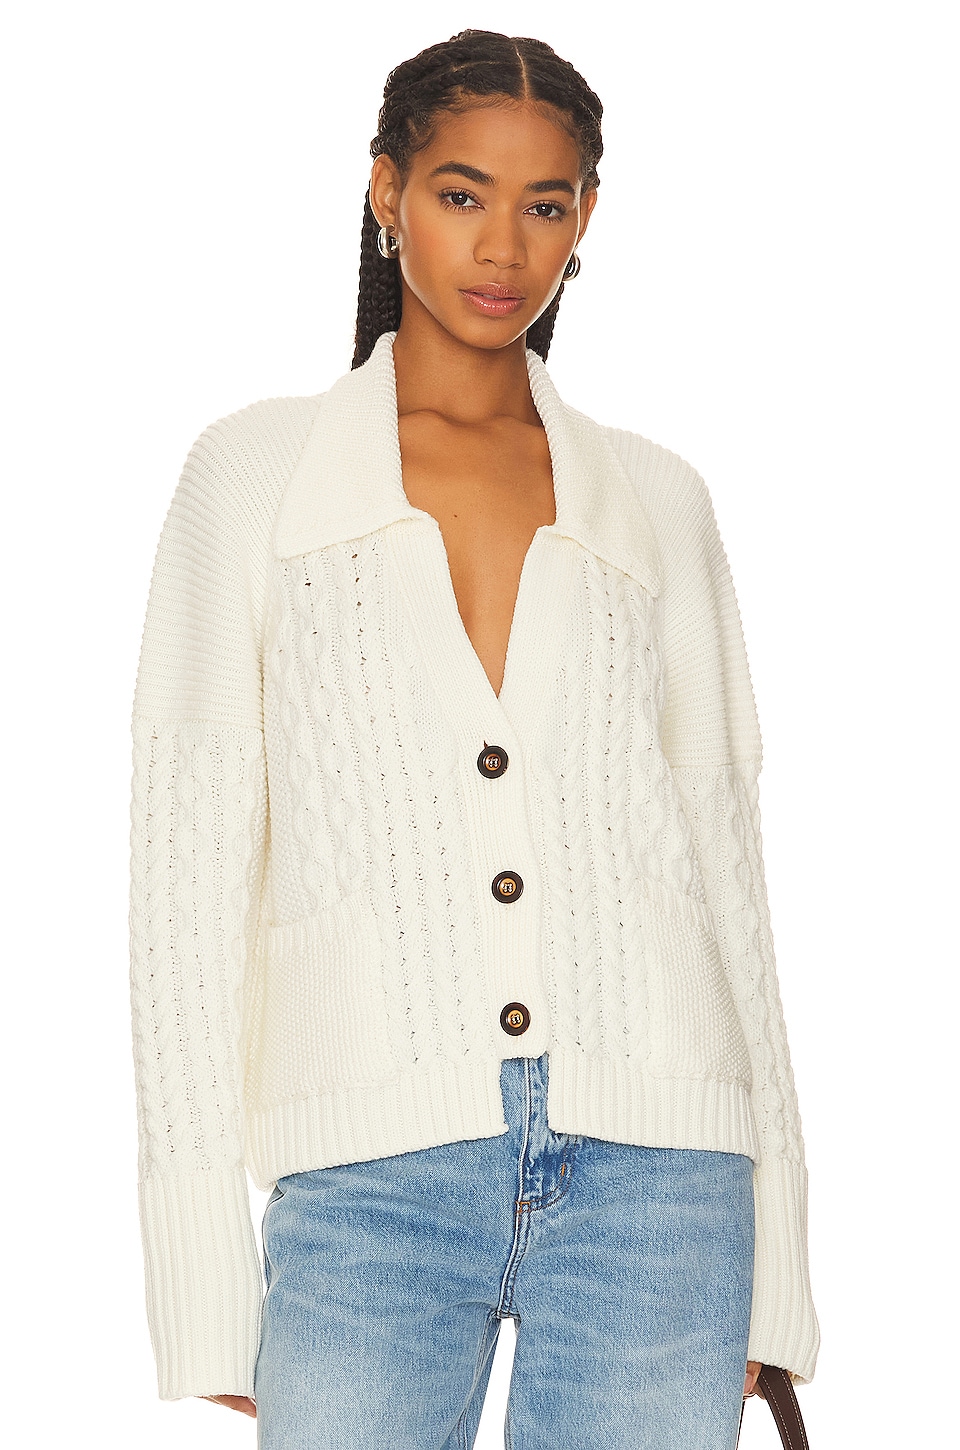 Shop winter sweaters for women: Cardigans, turtlenecks and more - Good ...